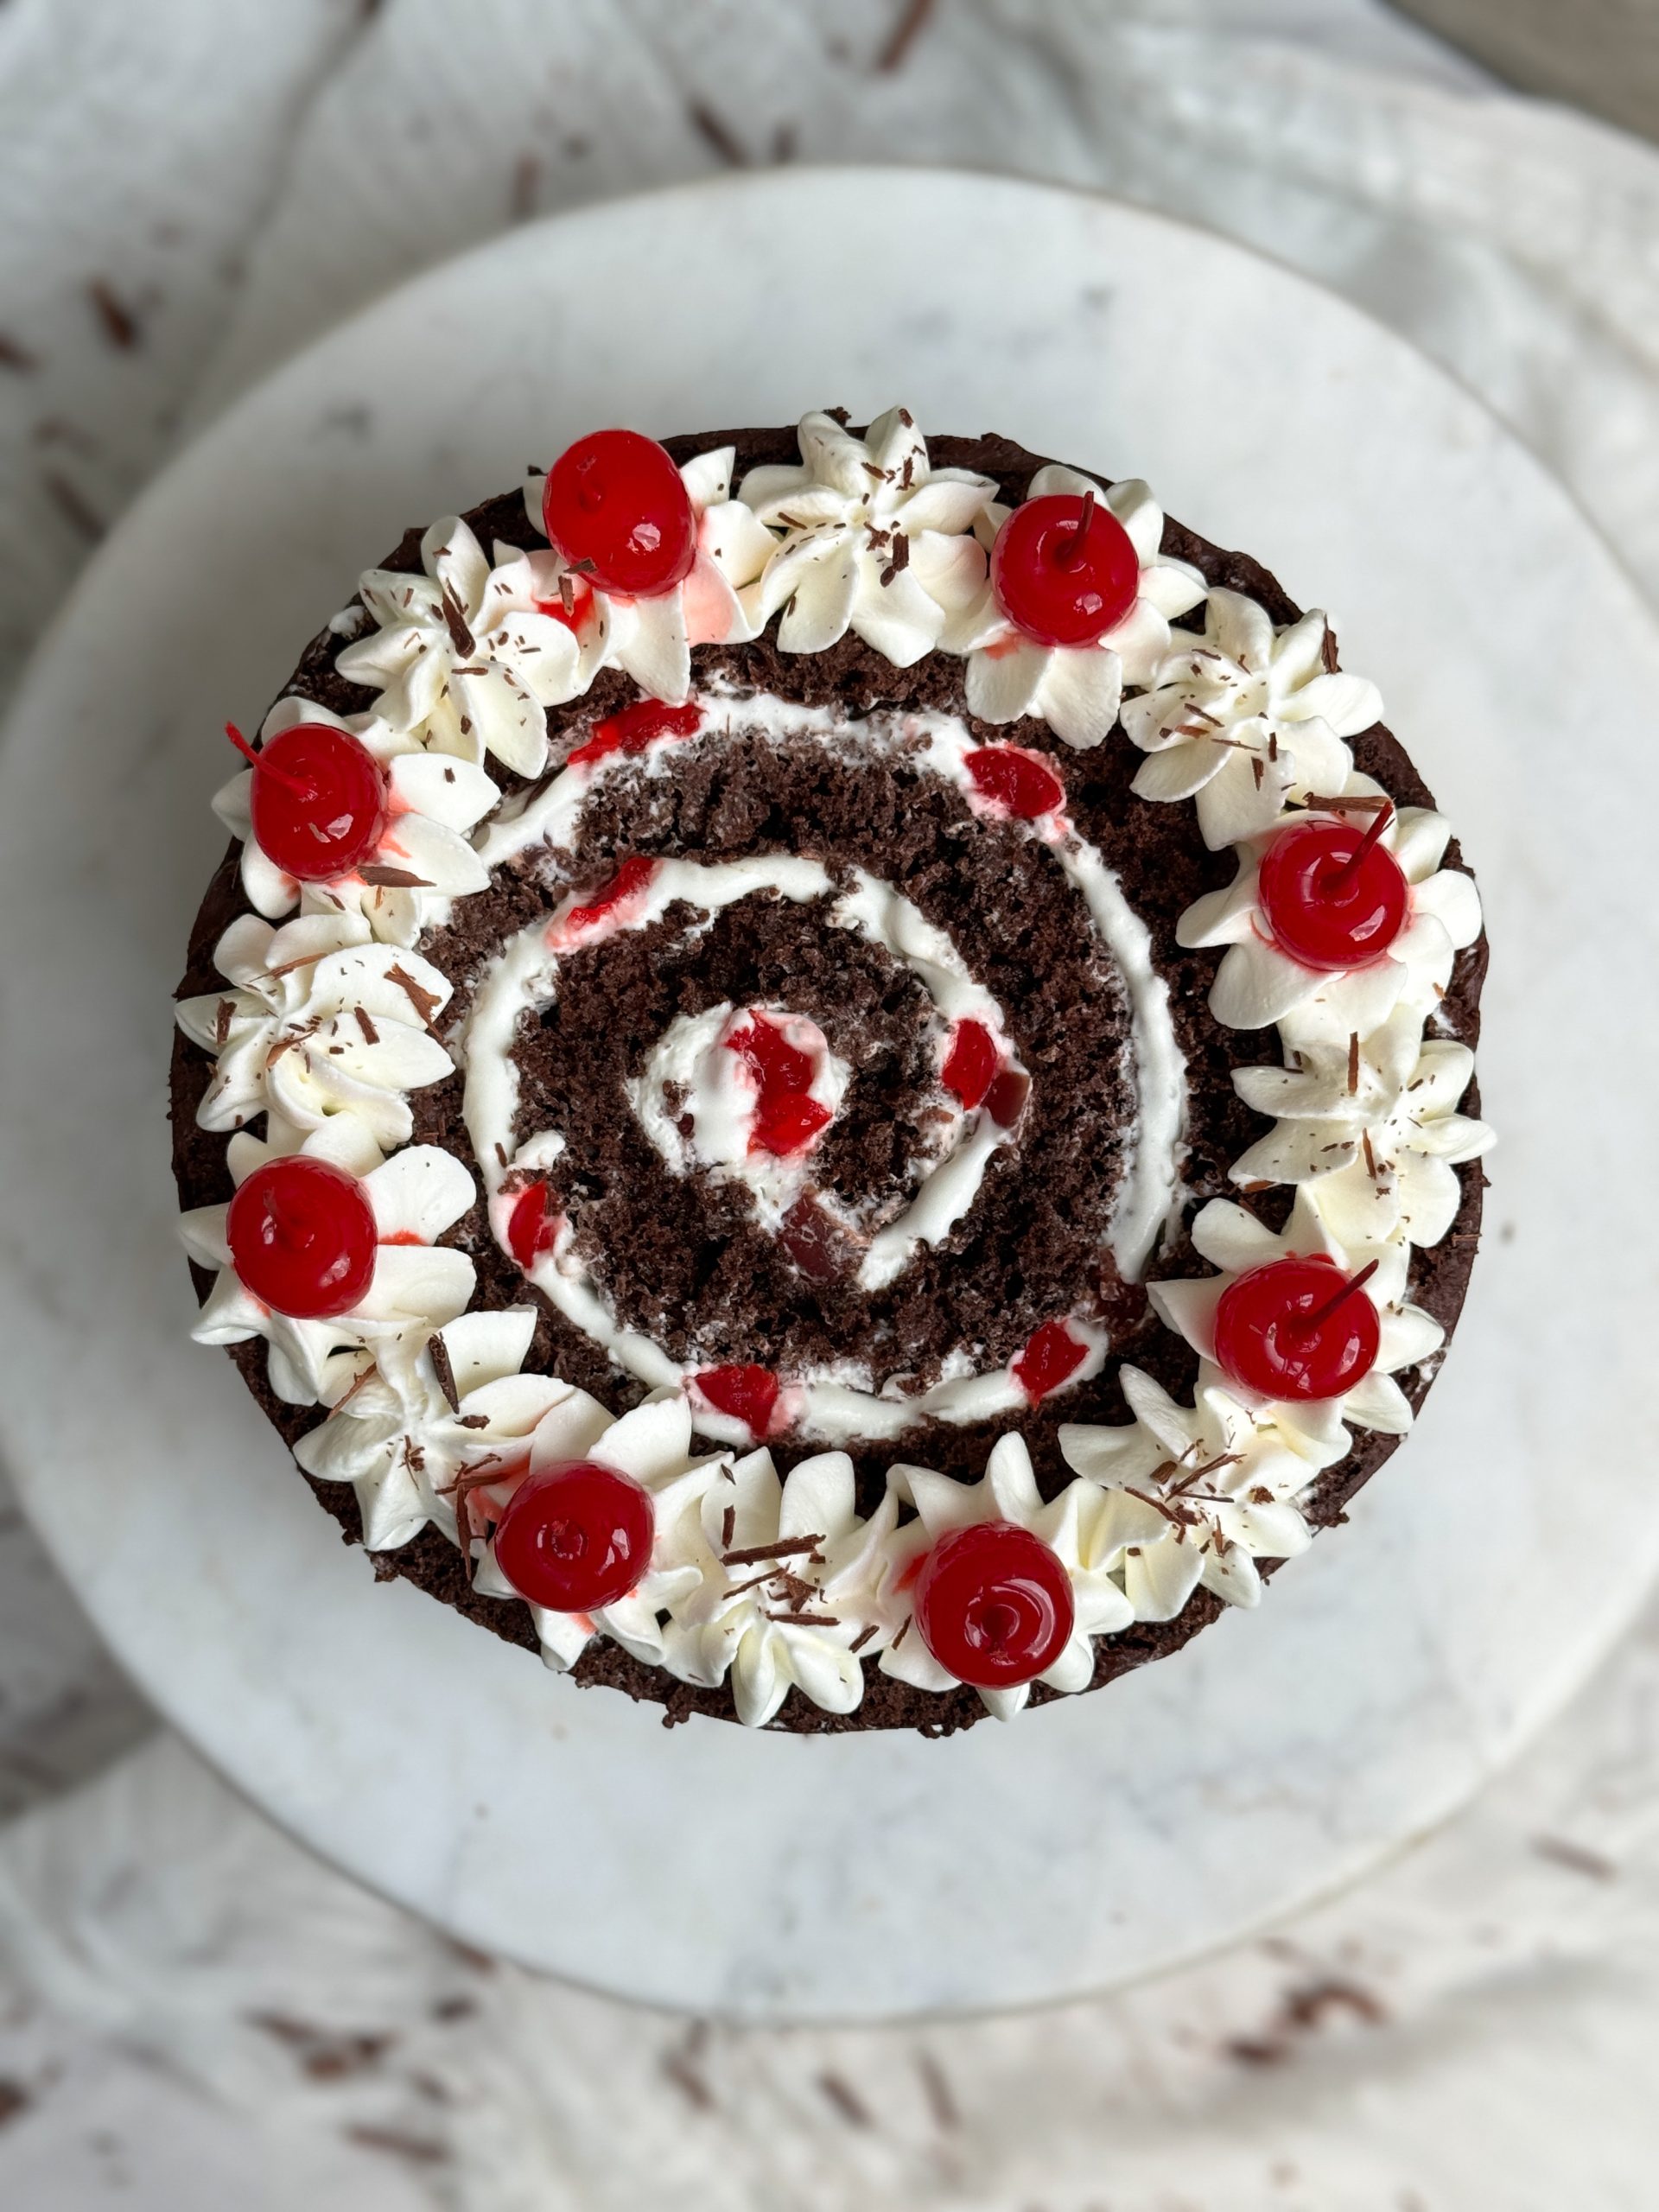 vertical black forest swiss roll cake from the top. the cake has a swirl of chocolate cake and whipped cream, with cream and cherries used for decoration on top